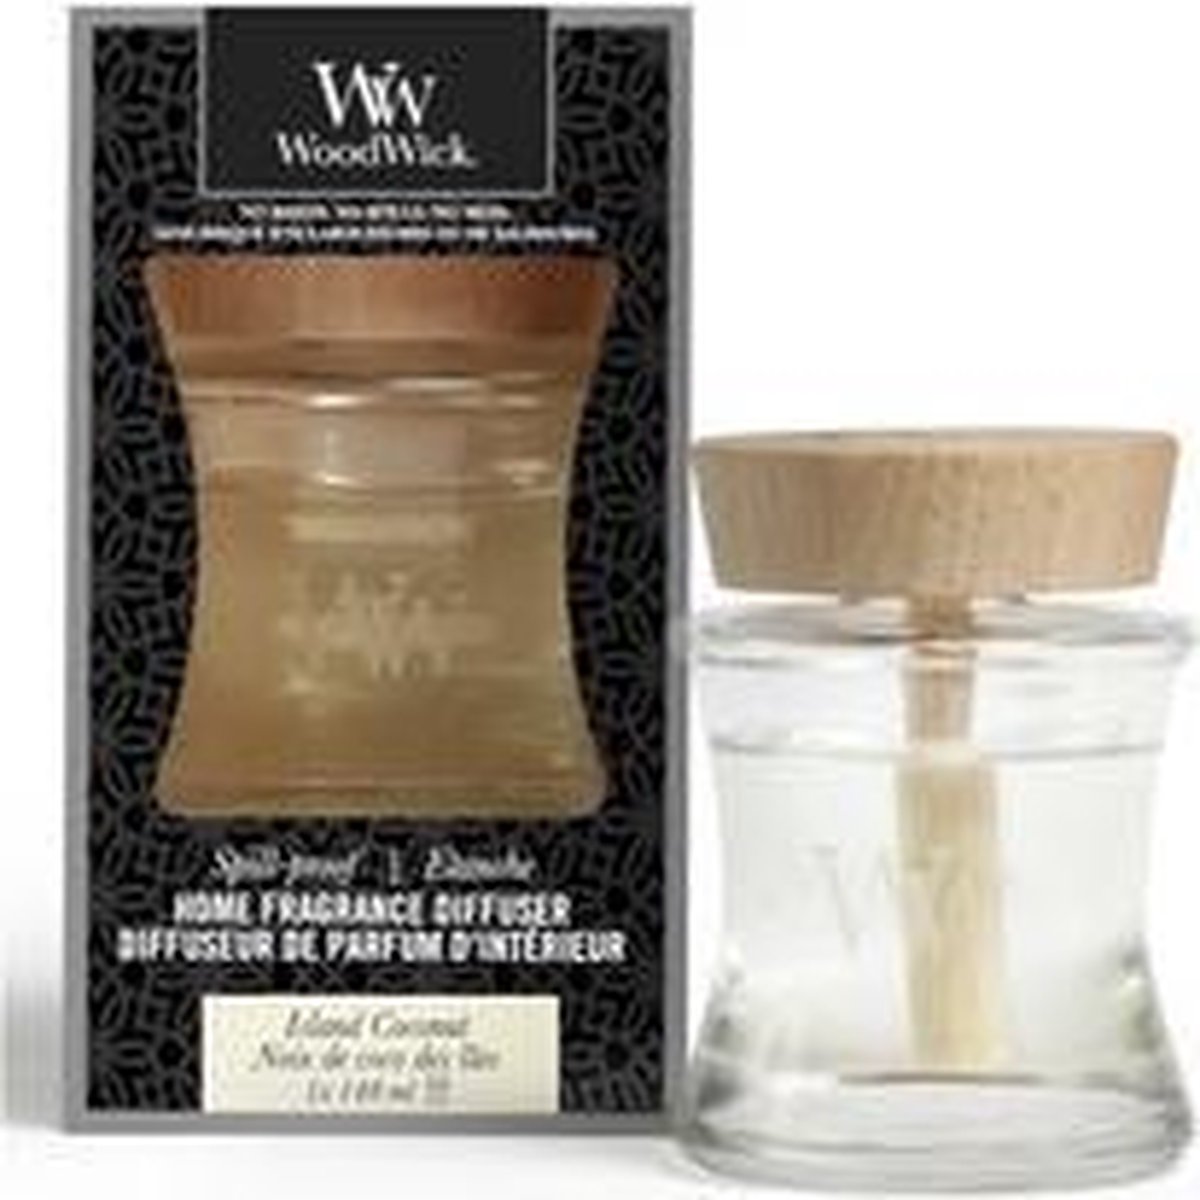 Woodwick - Island Coconut Home Fragrance Diffuser ( Juicy Coconut ) - Aroma Diffuser With Lid